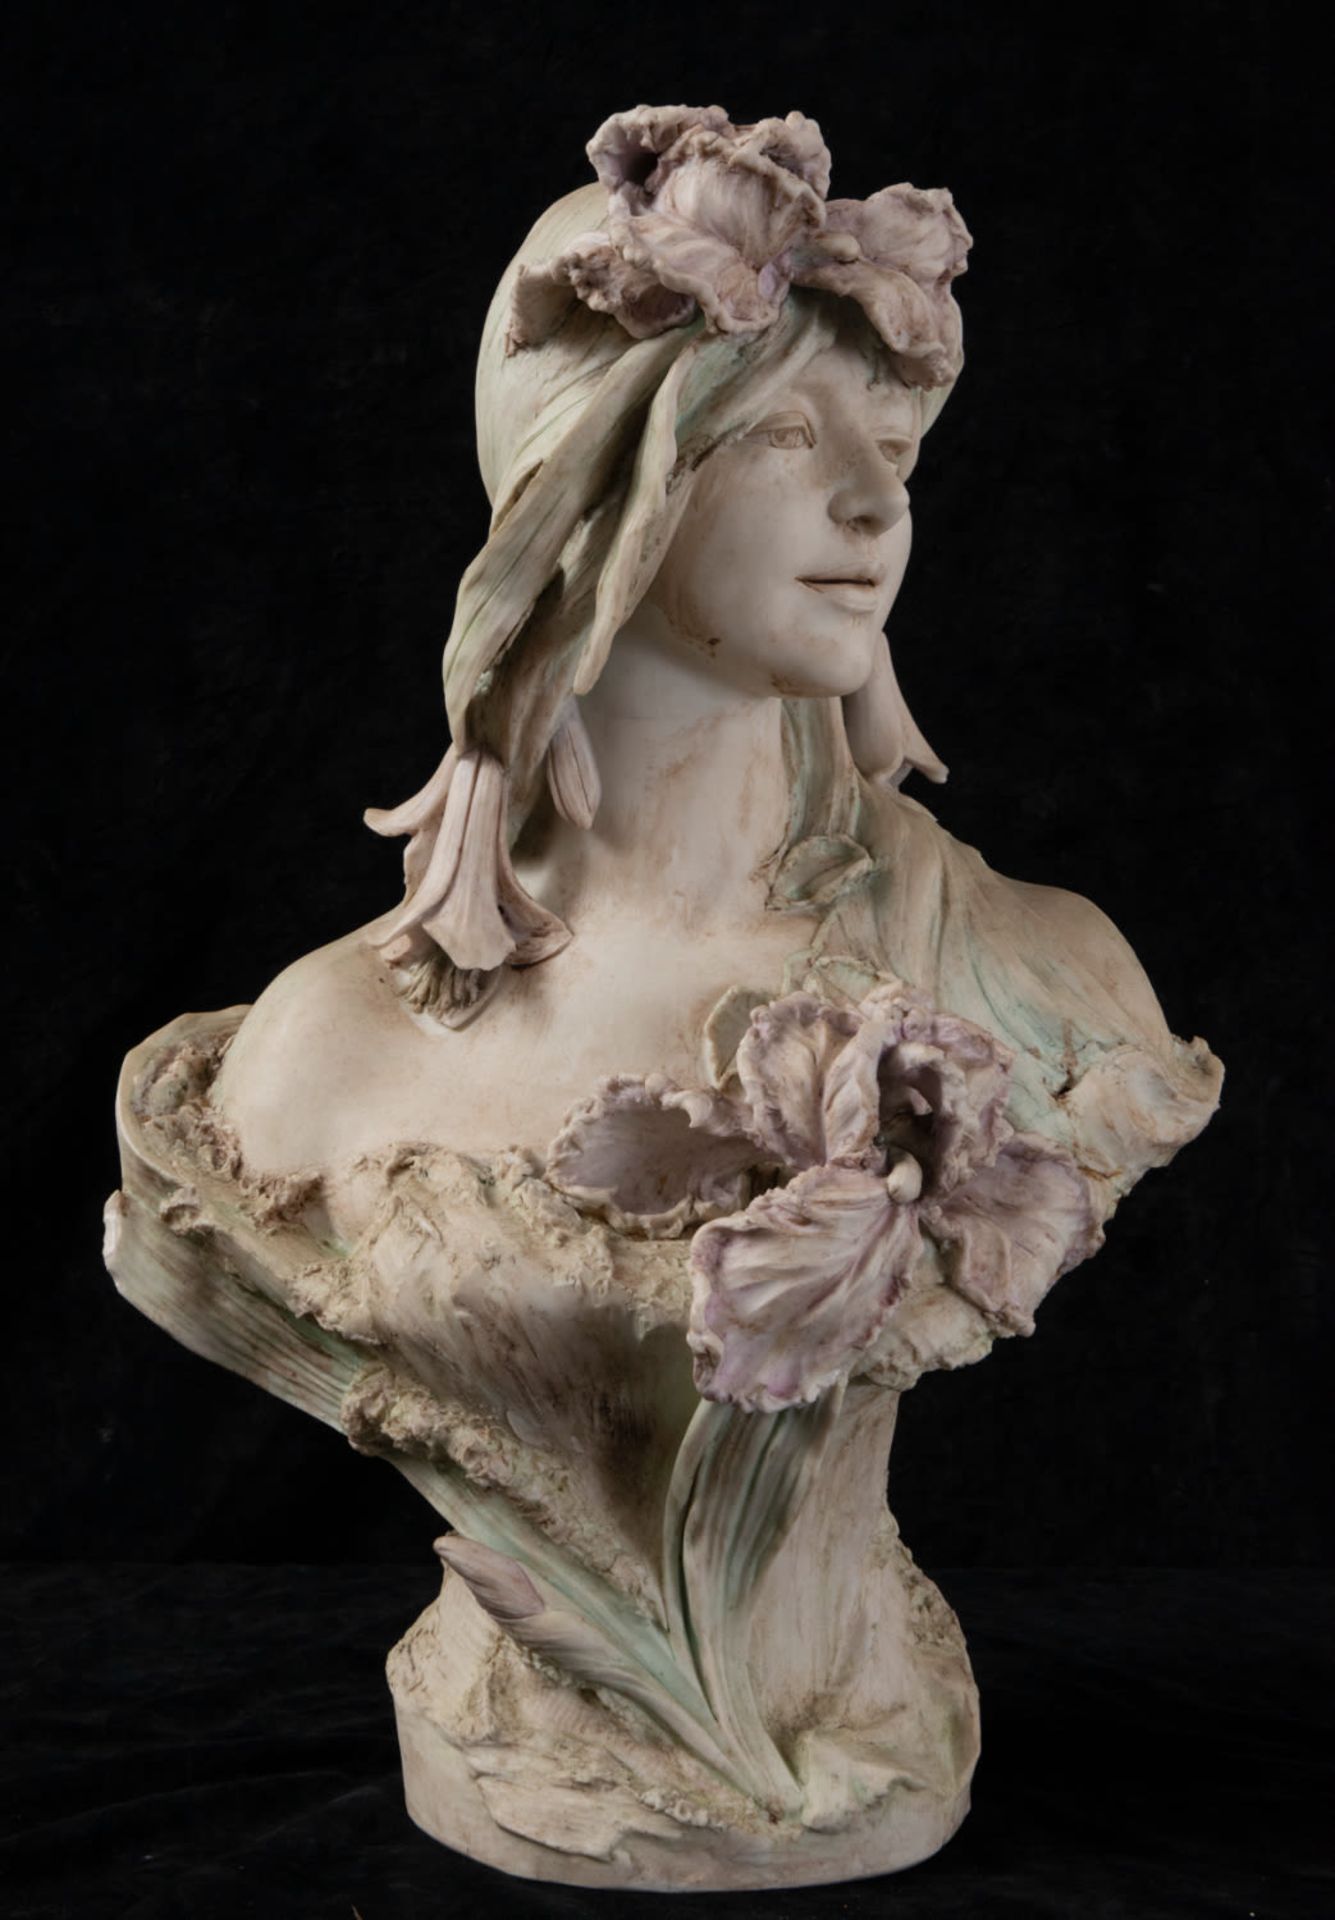 Biscuit bust of a young lady with flowers in her hand and head, 19th century